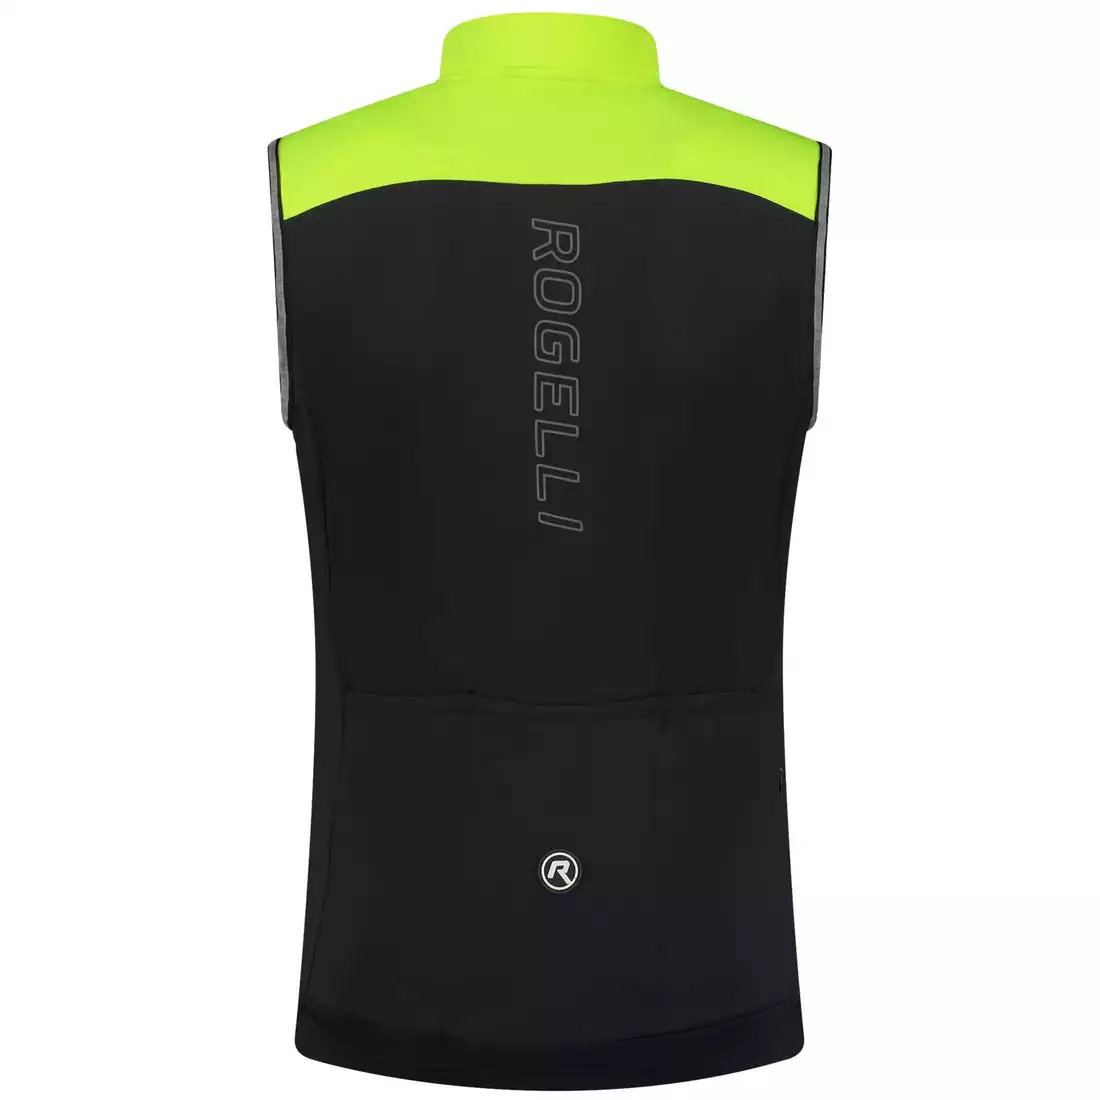 ROGELLI ESSENTIAL men's cycling vest, yellow